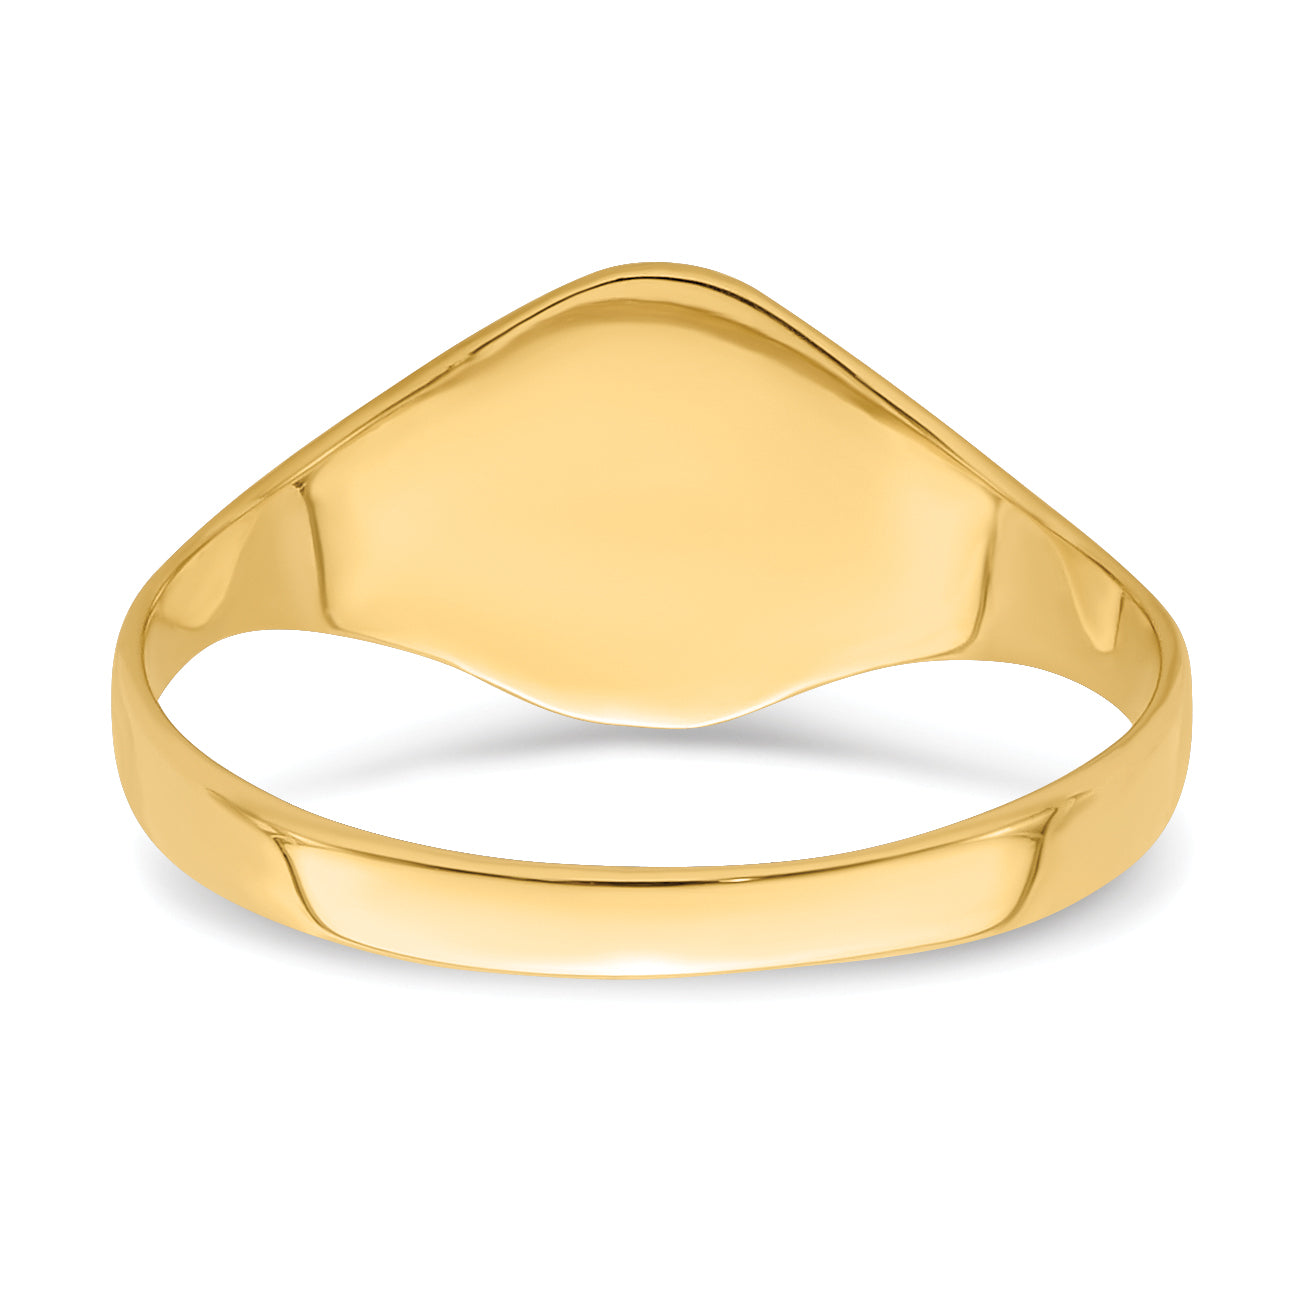 10k High Polished Oval Baby Signet Ring